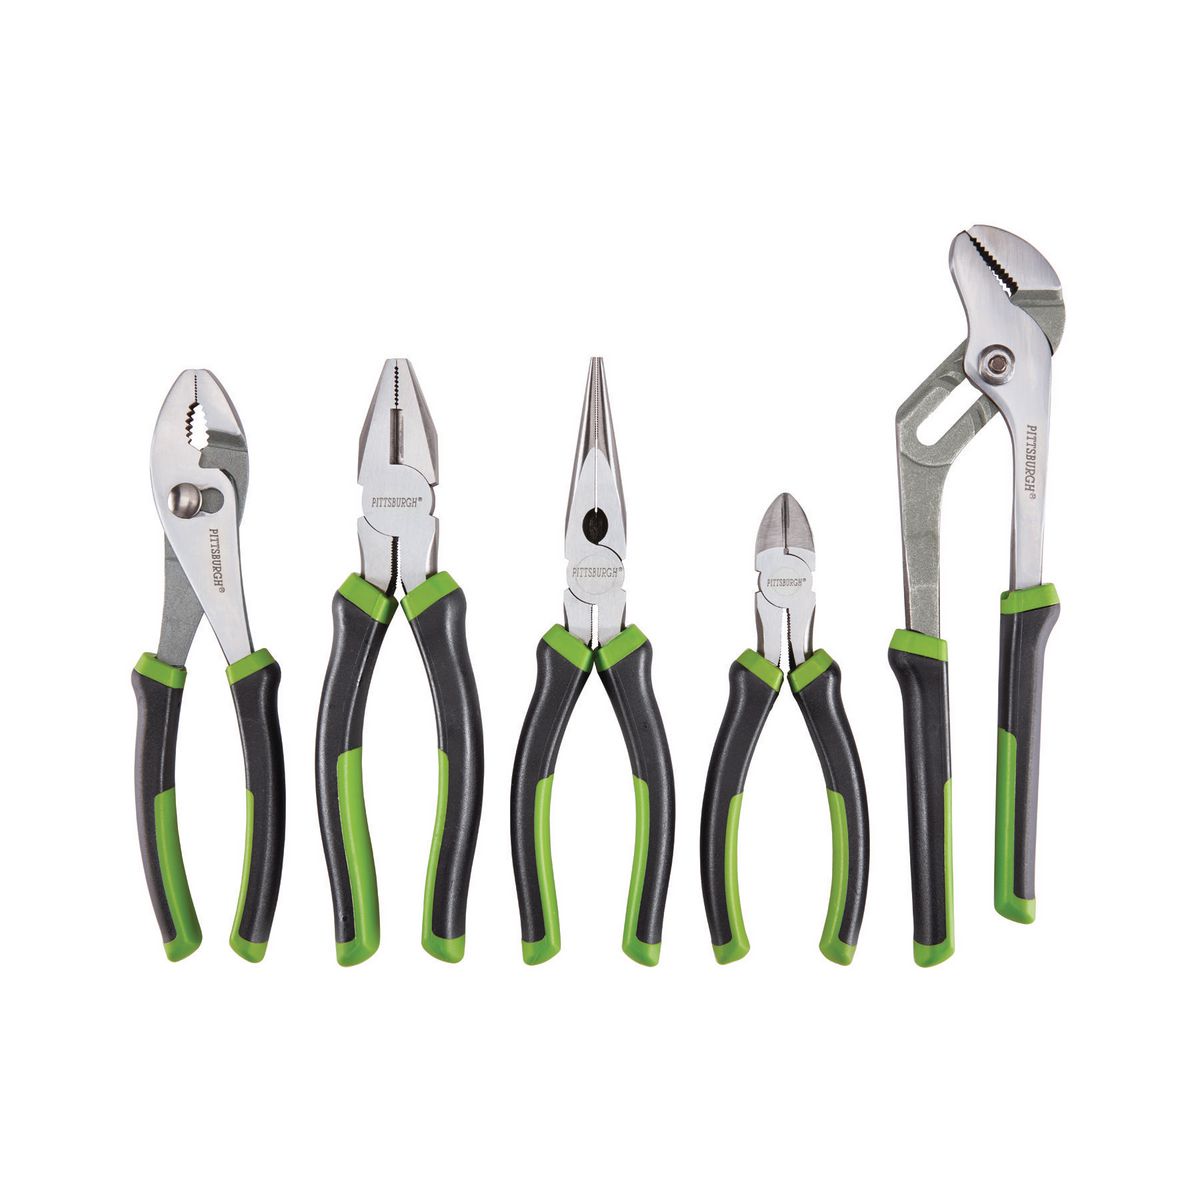 PITTSBURGH Pliers Set with Comfort Grips 5 Pc. - Item 64136